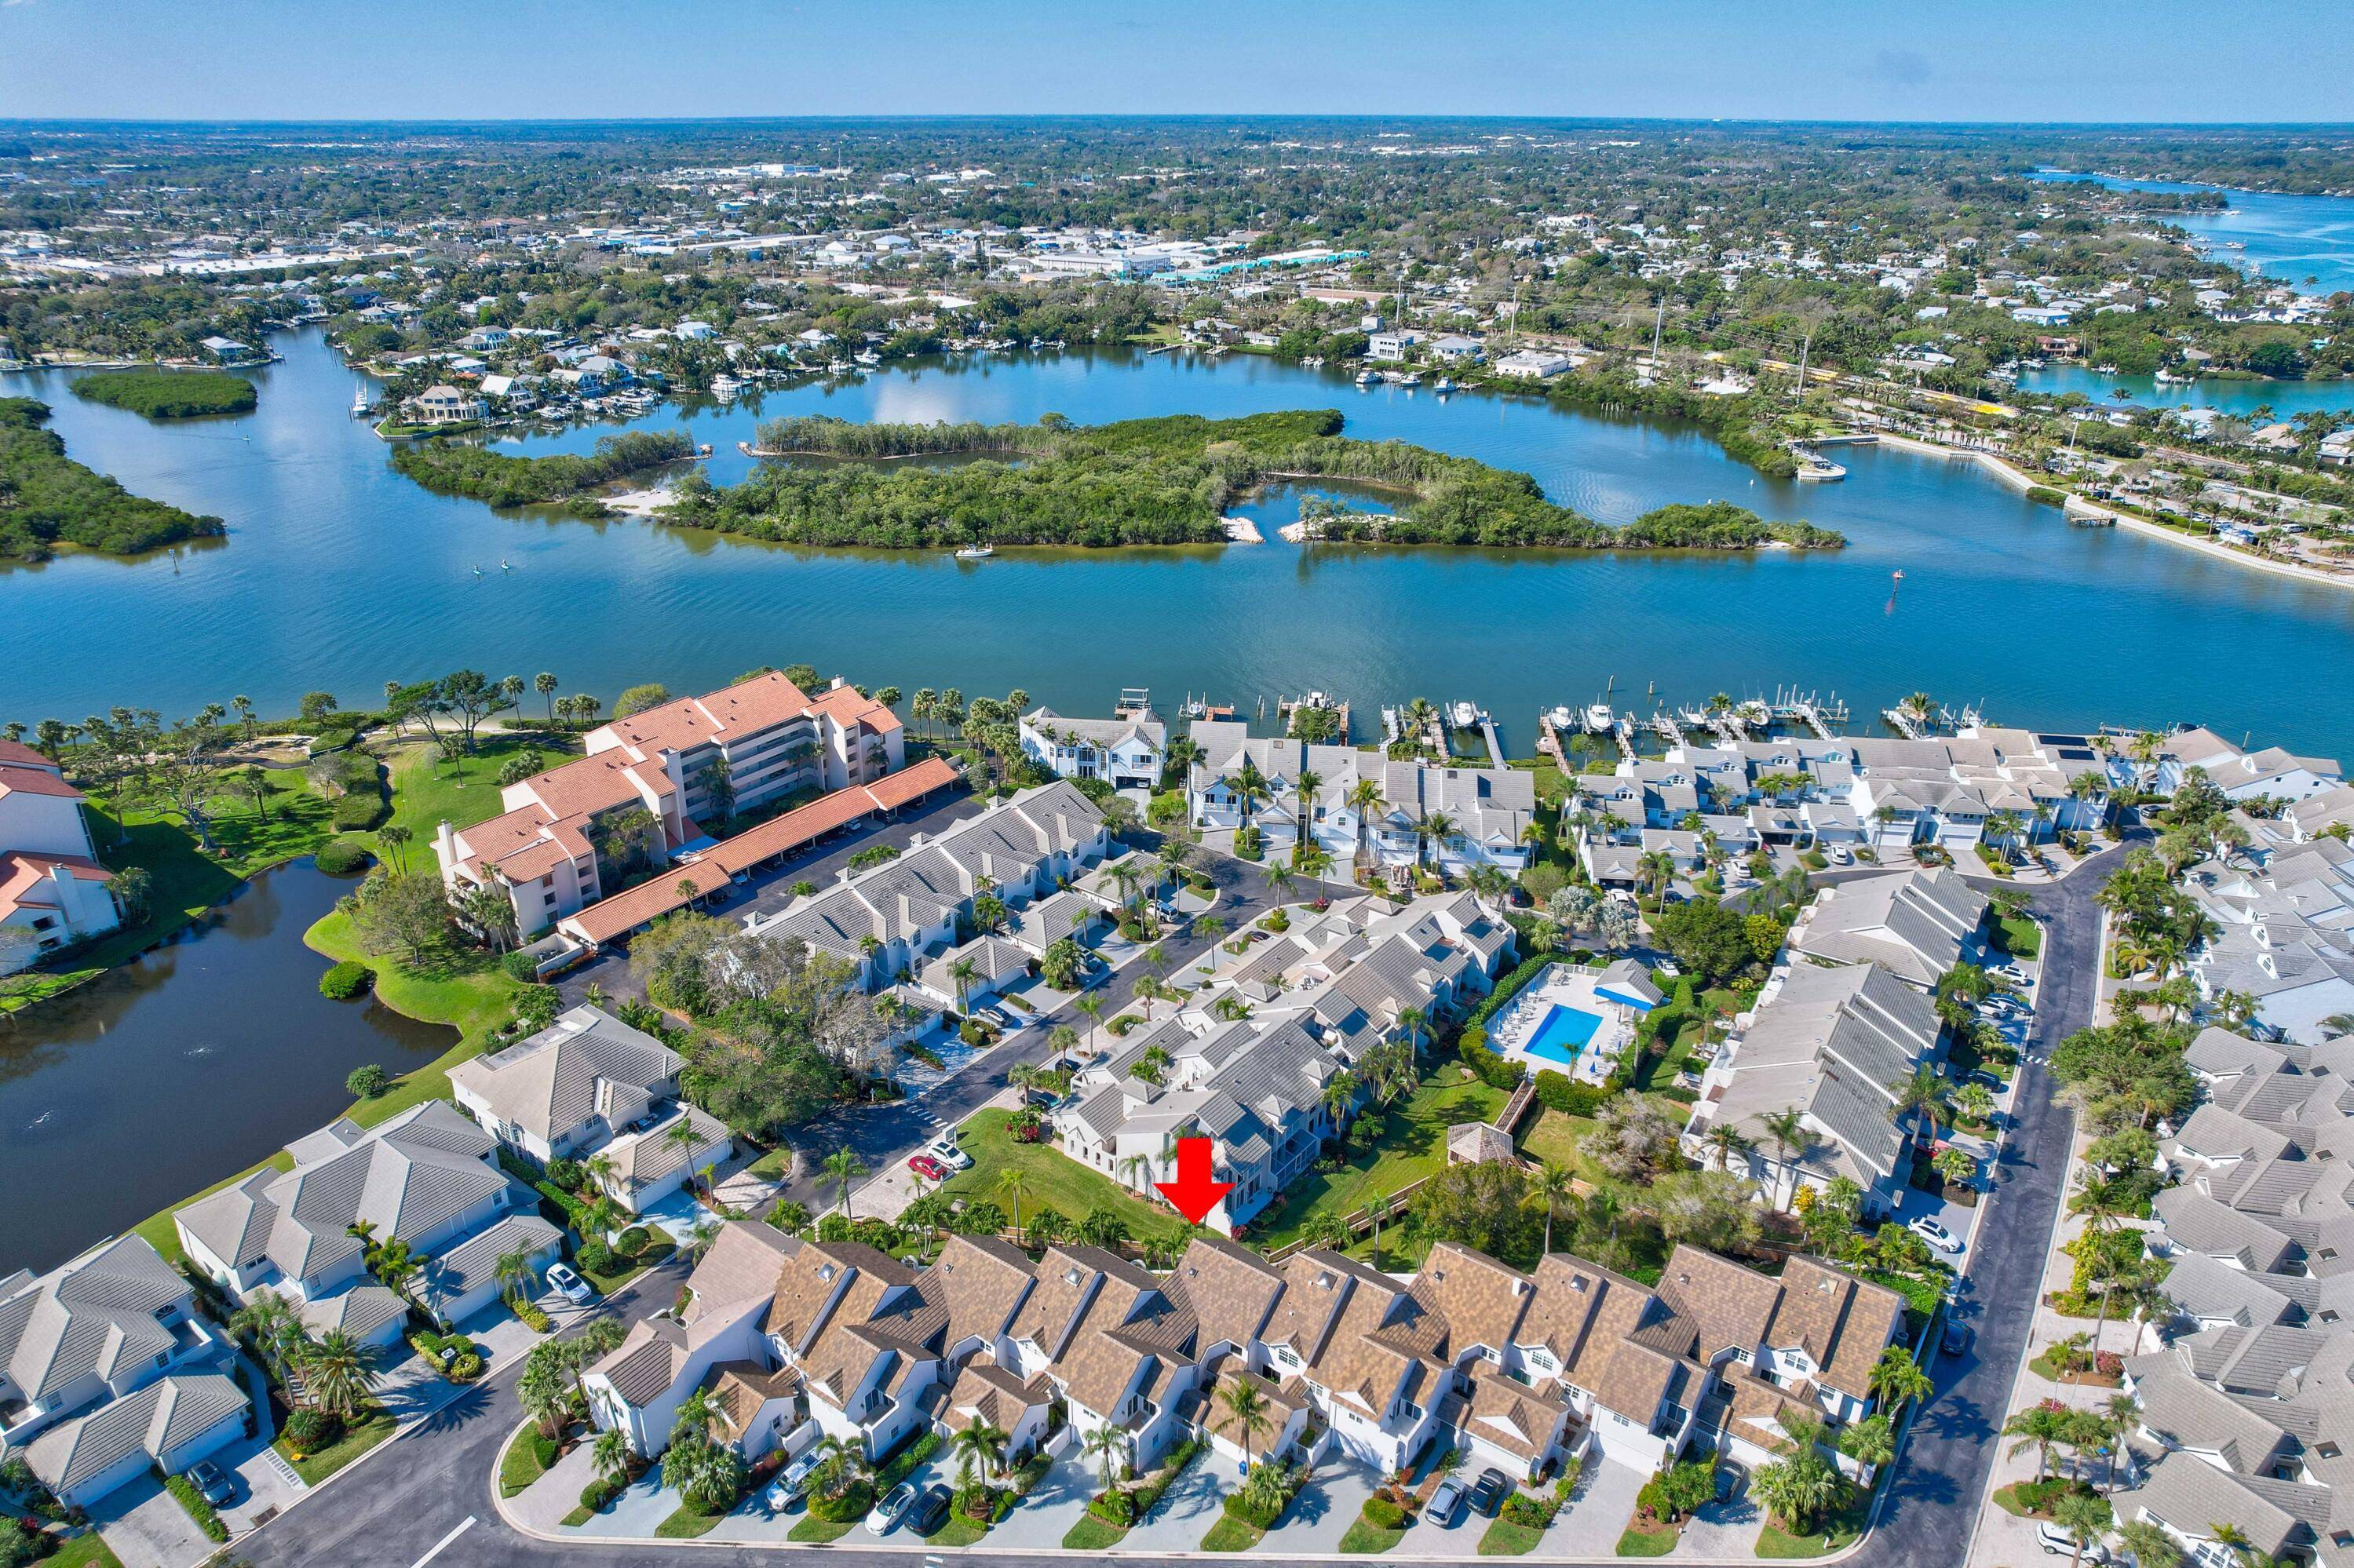 Discover your sanctuary in the Inlet District of Jupiter at Jupiter Harbour, where this exquisite 3BR 2.